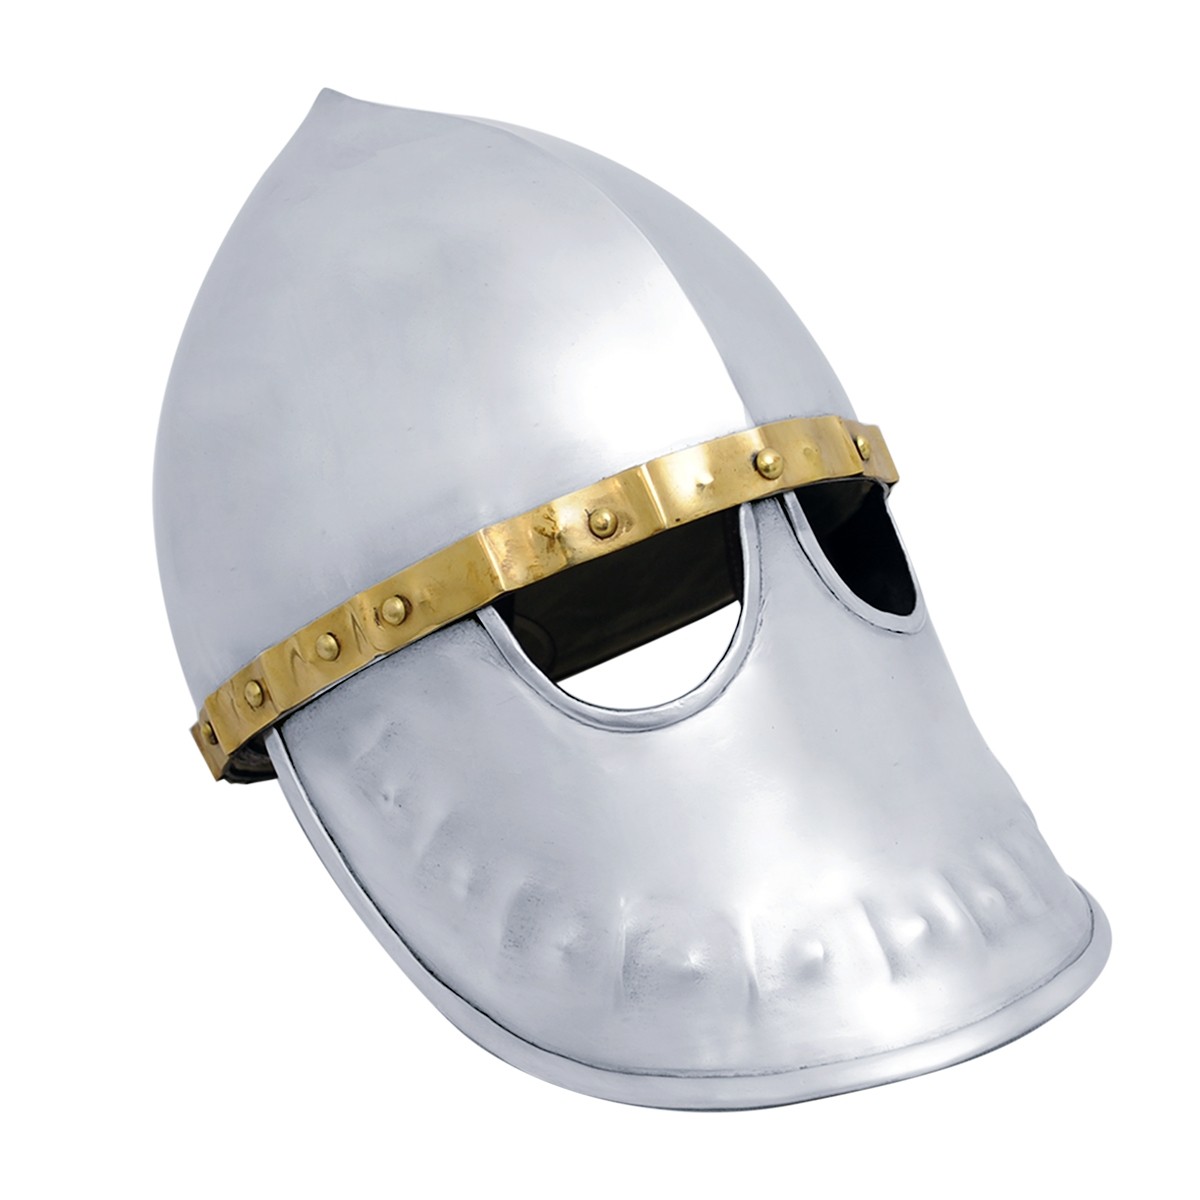 Italo Norman helmet with Face Plate C.1170